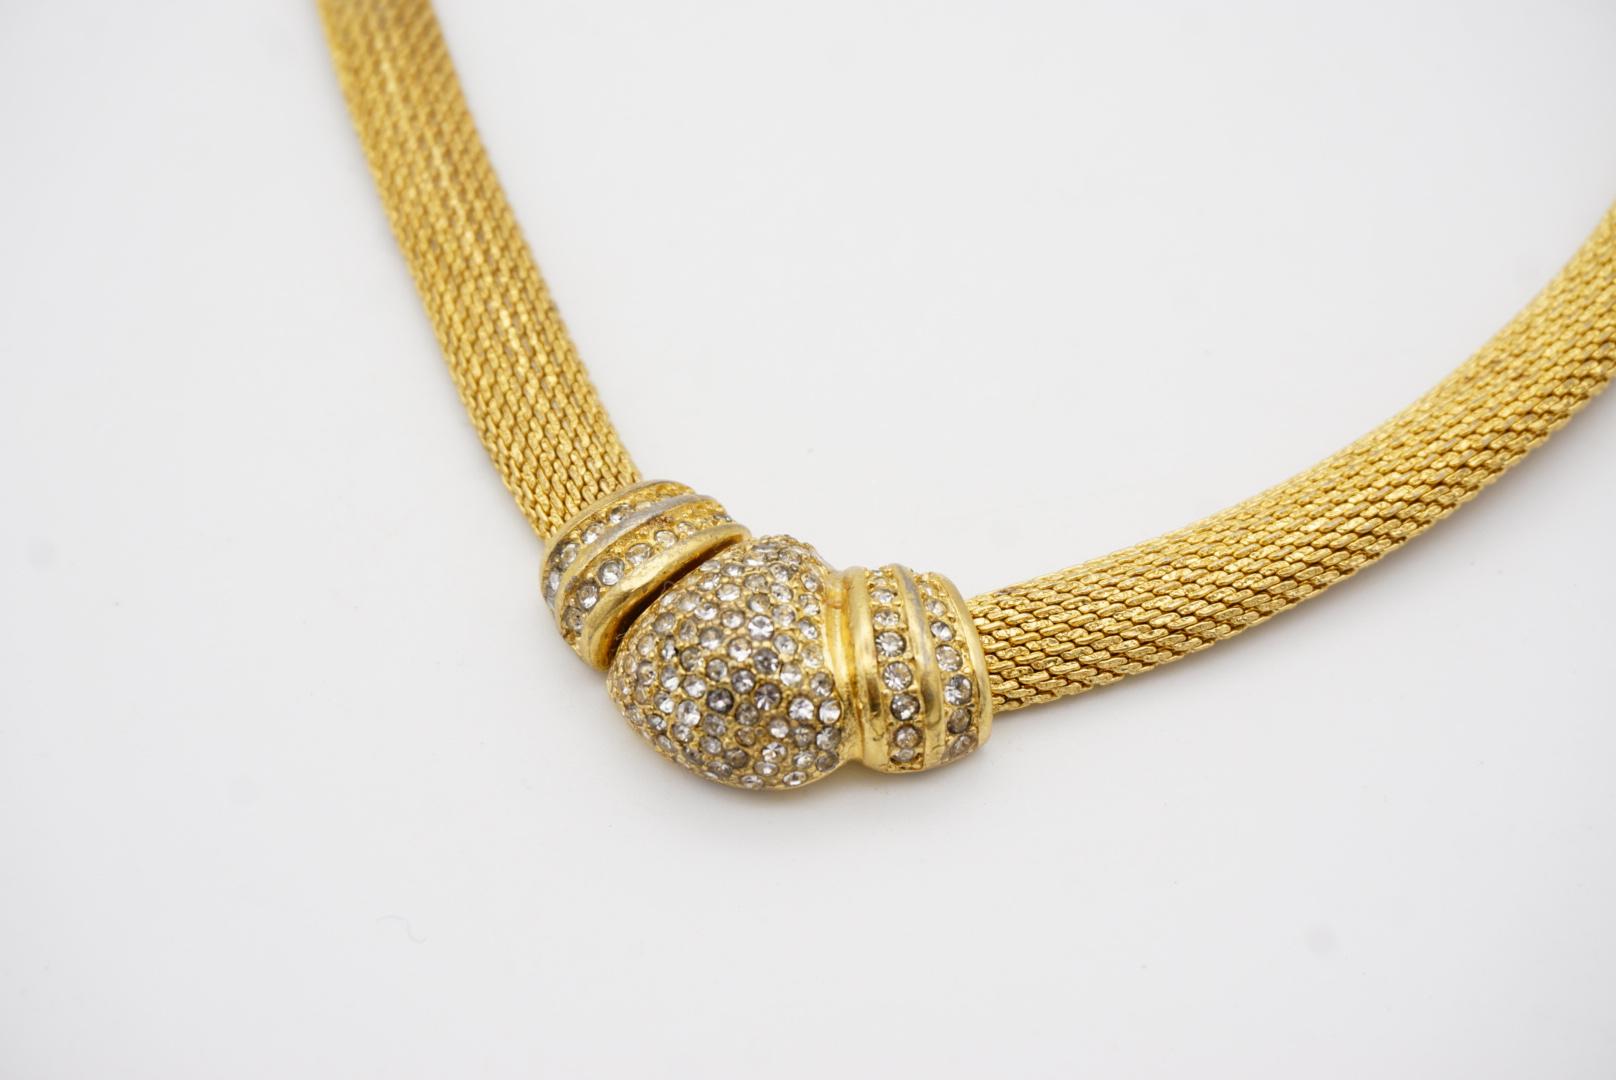 Christian Dior Vintage 1980s Whole Crystals Button Snake Omega Gold Necklace For Sale 1